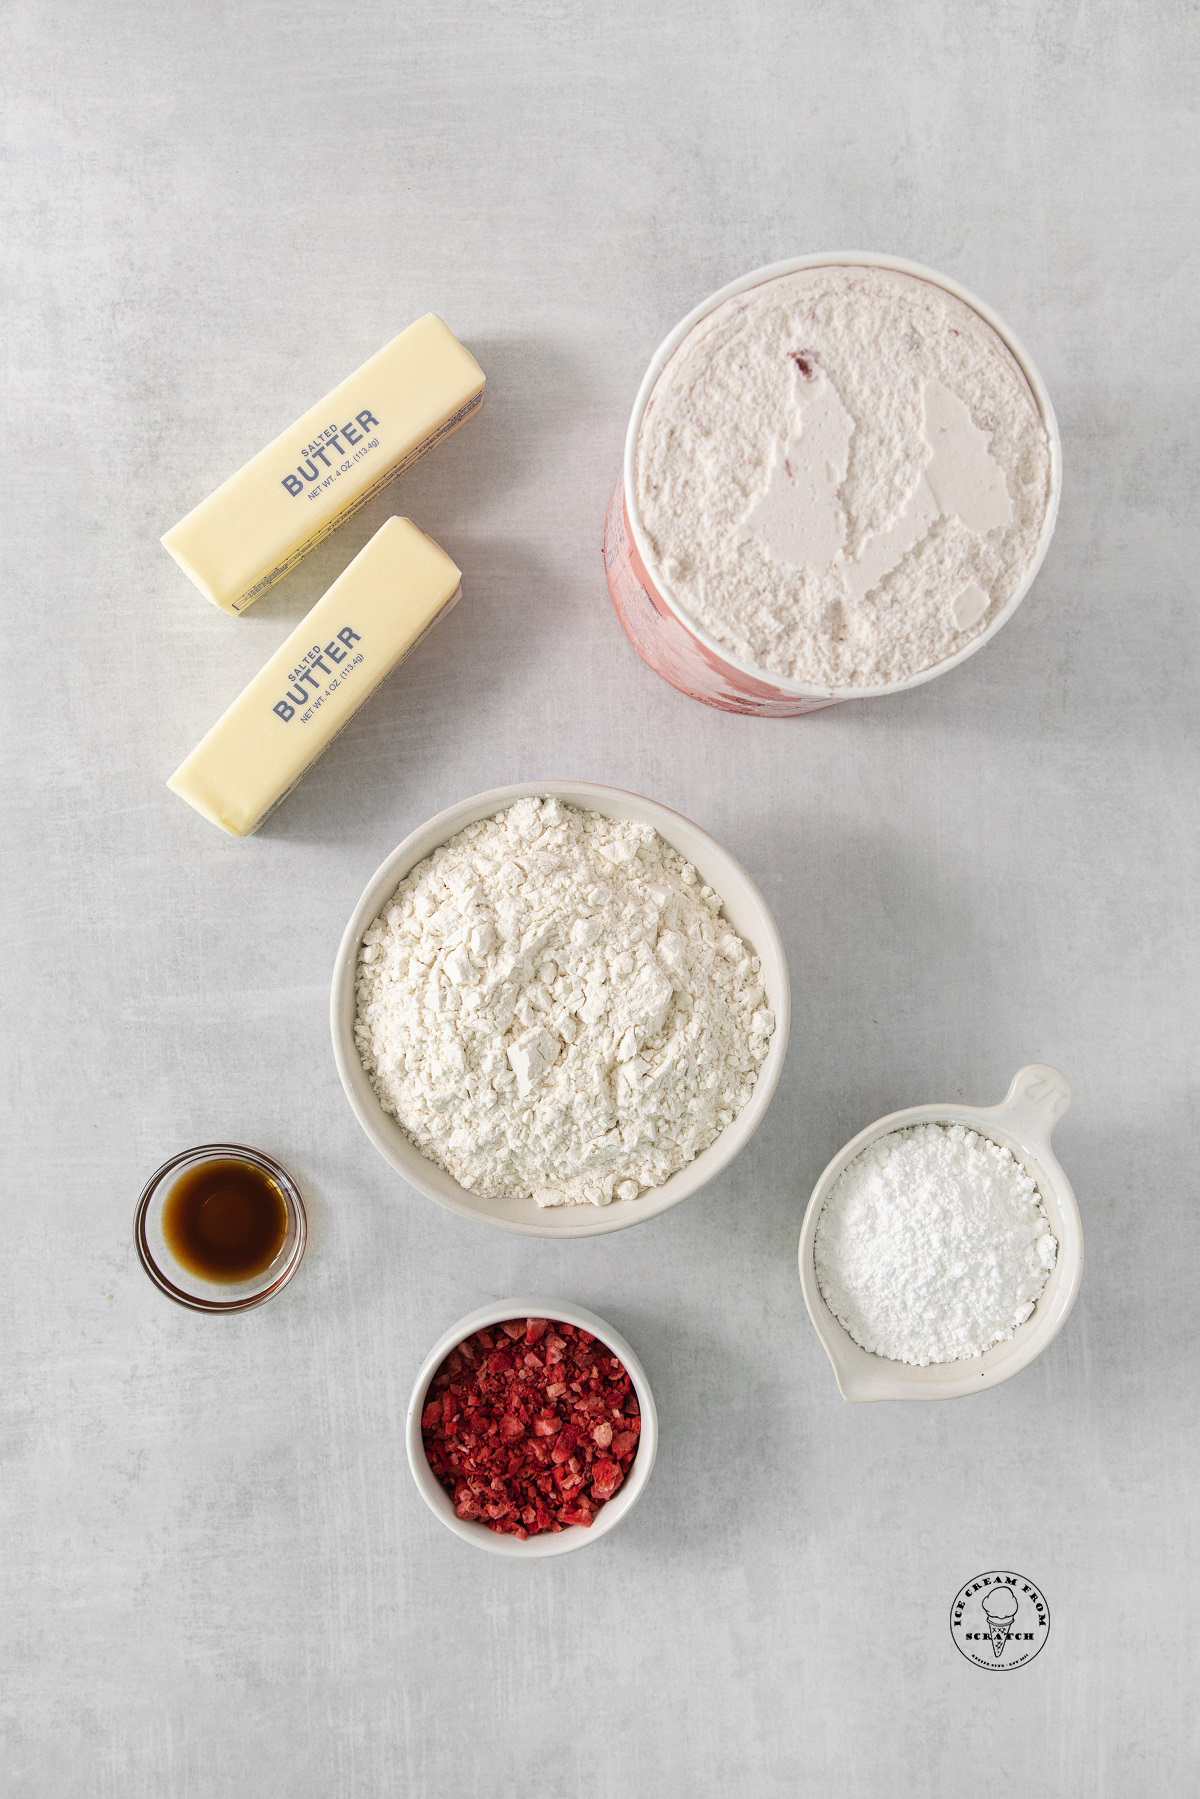 the six ingredients needed to make homemade strawberry ice cream sandwiches.